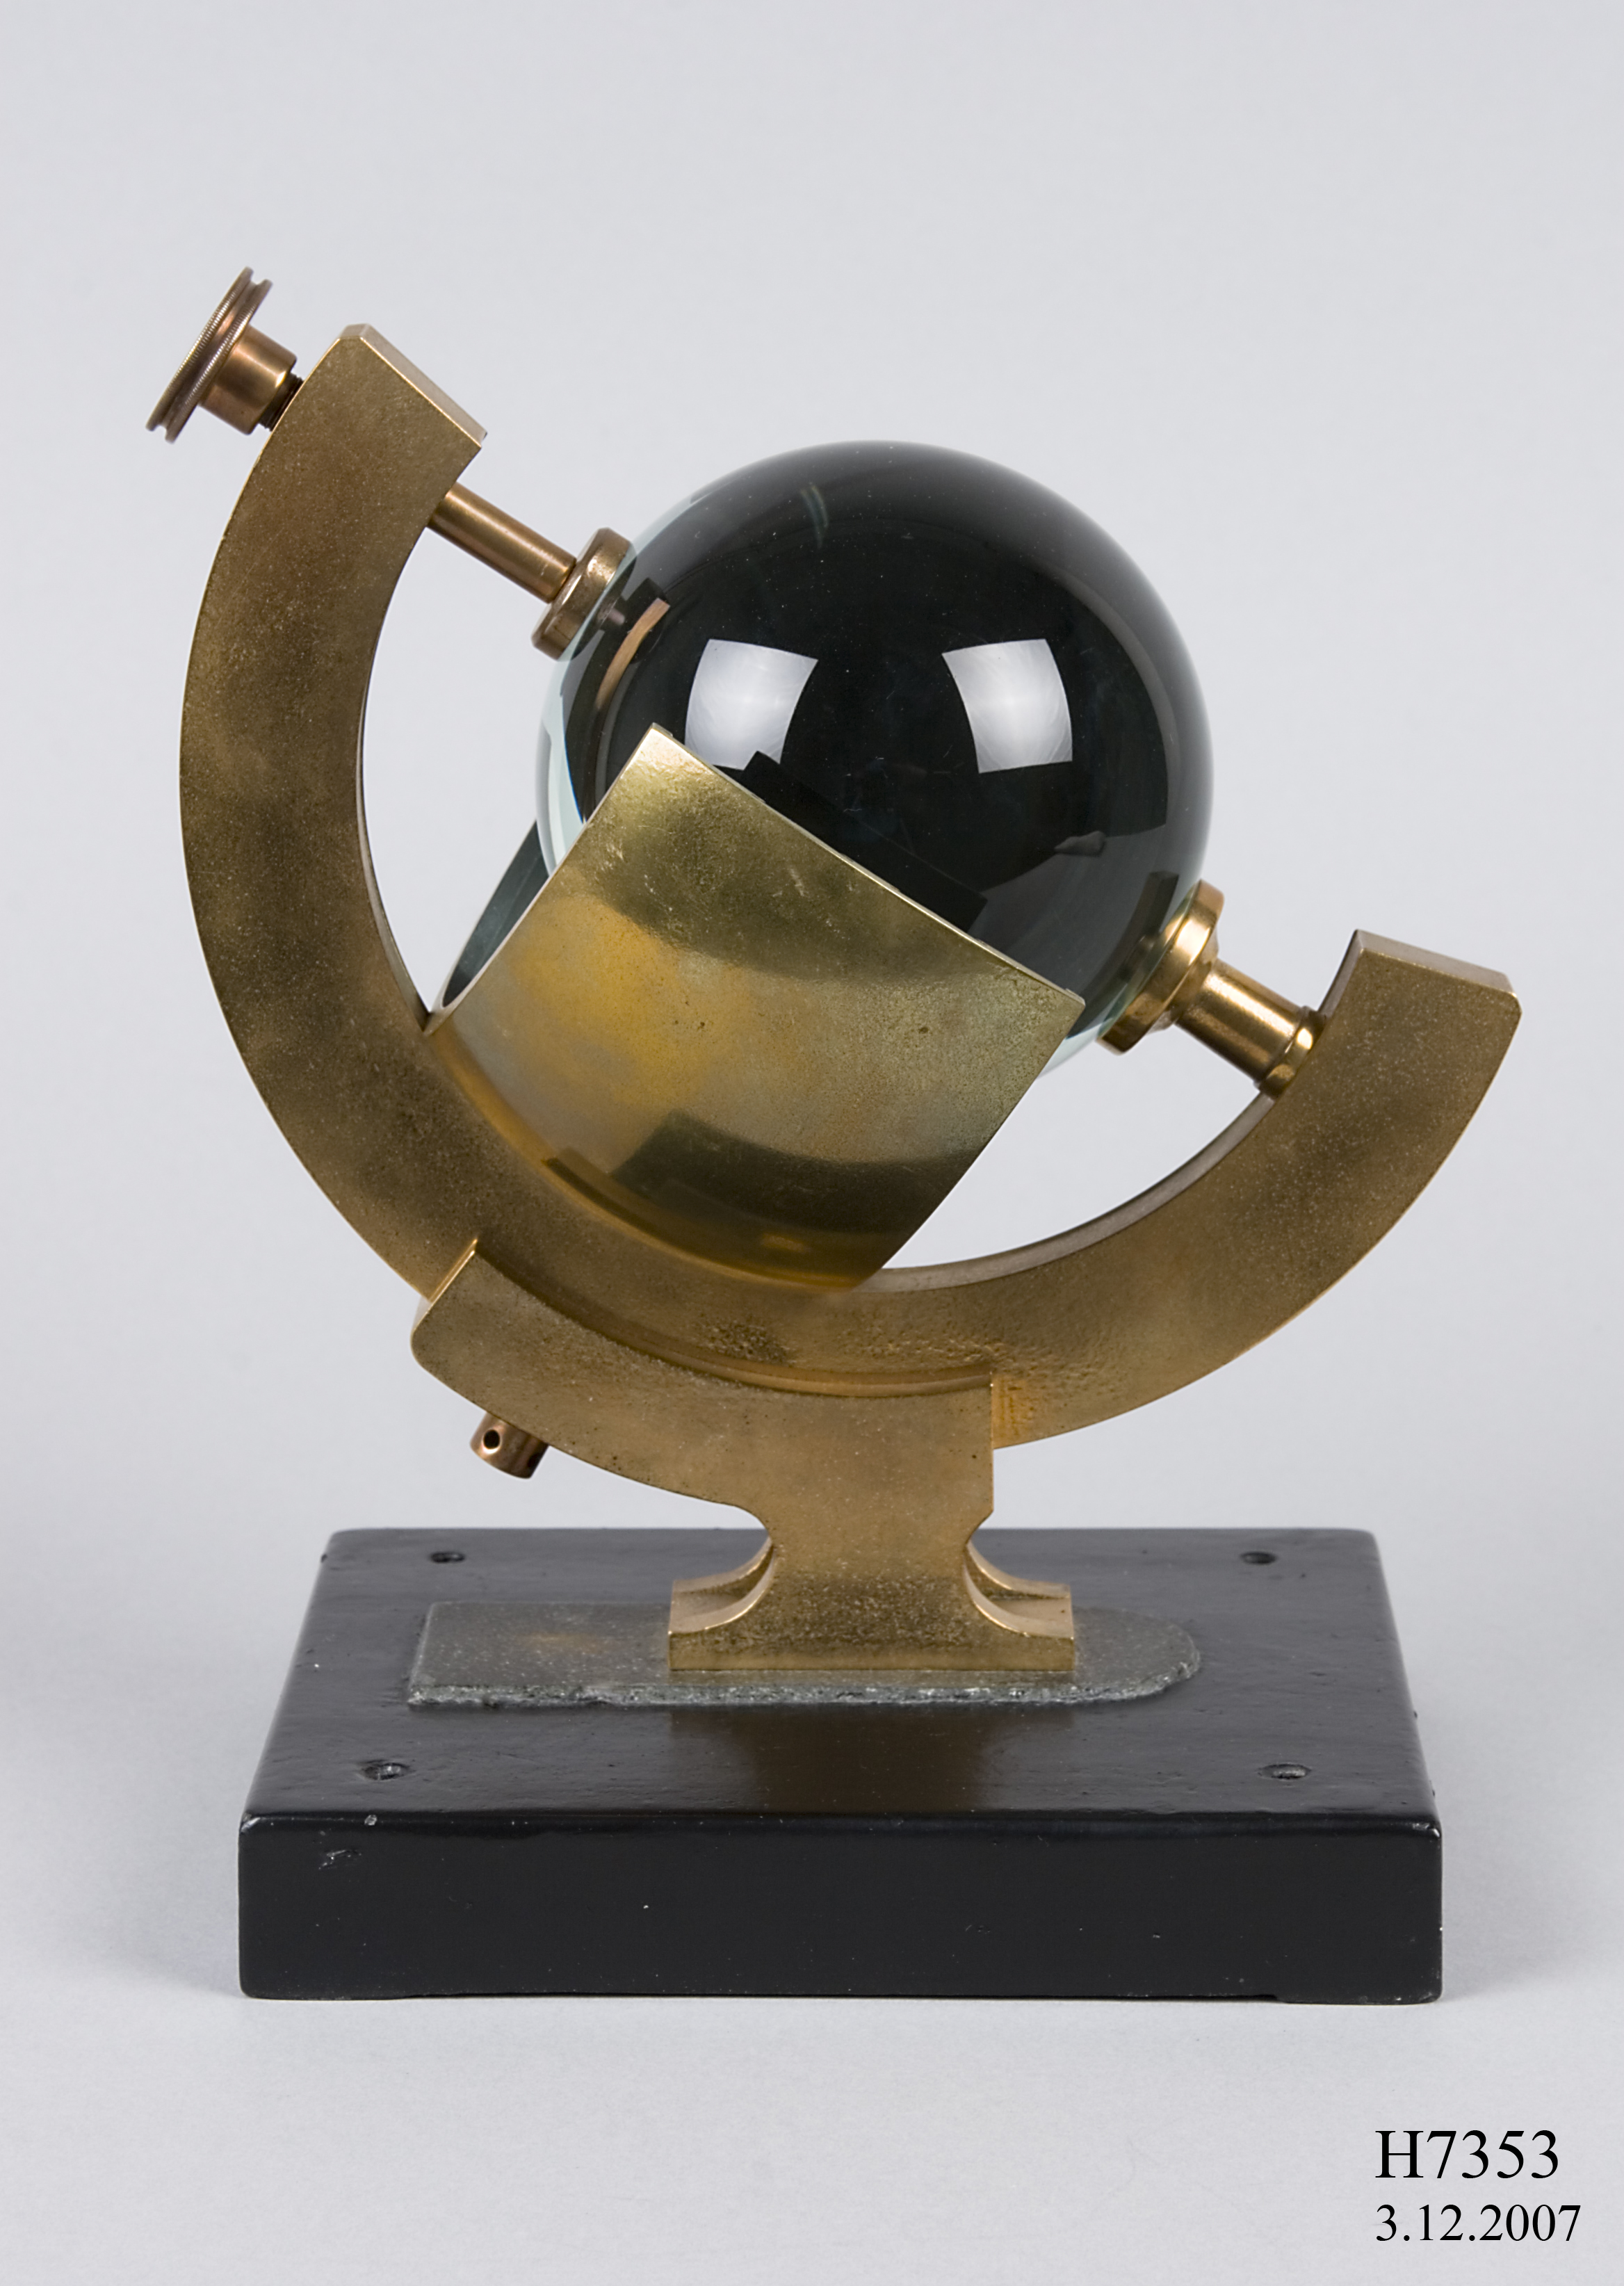 Campbell-Stokes sunshine recorder by Fuess, Berlin